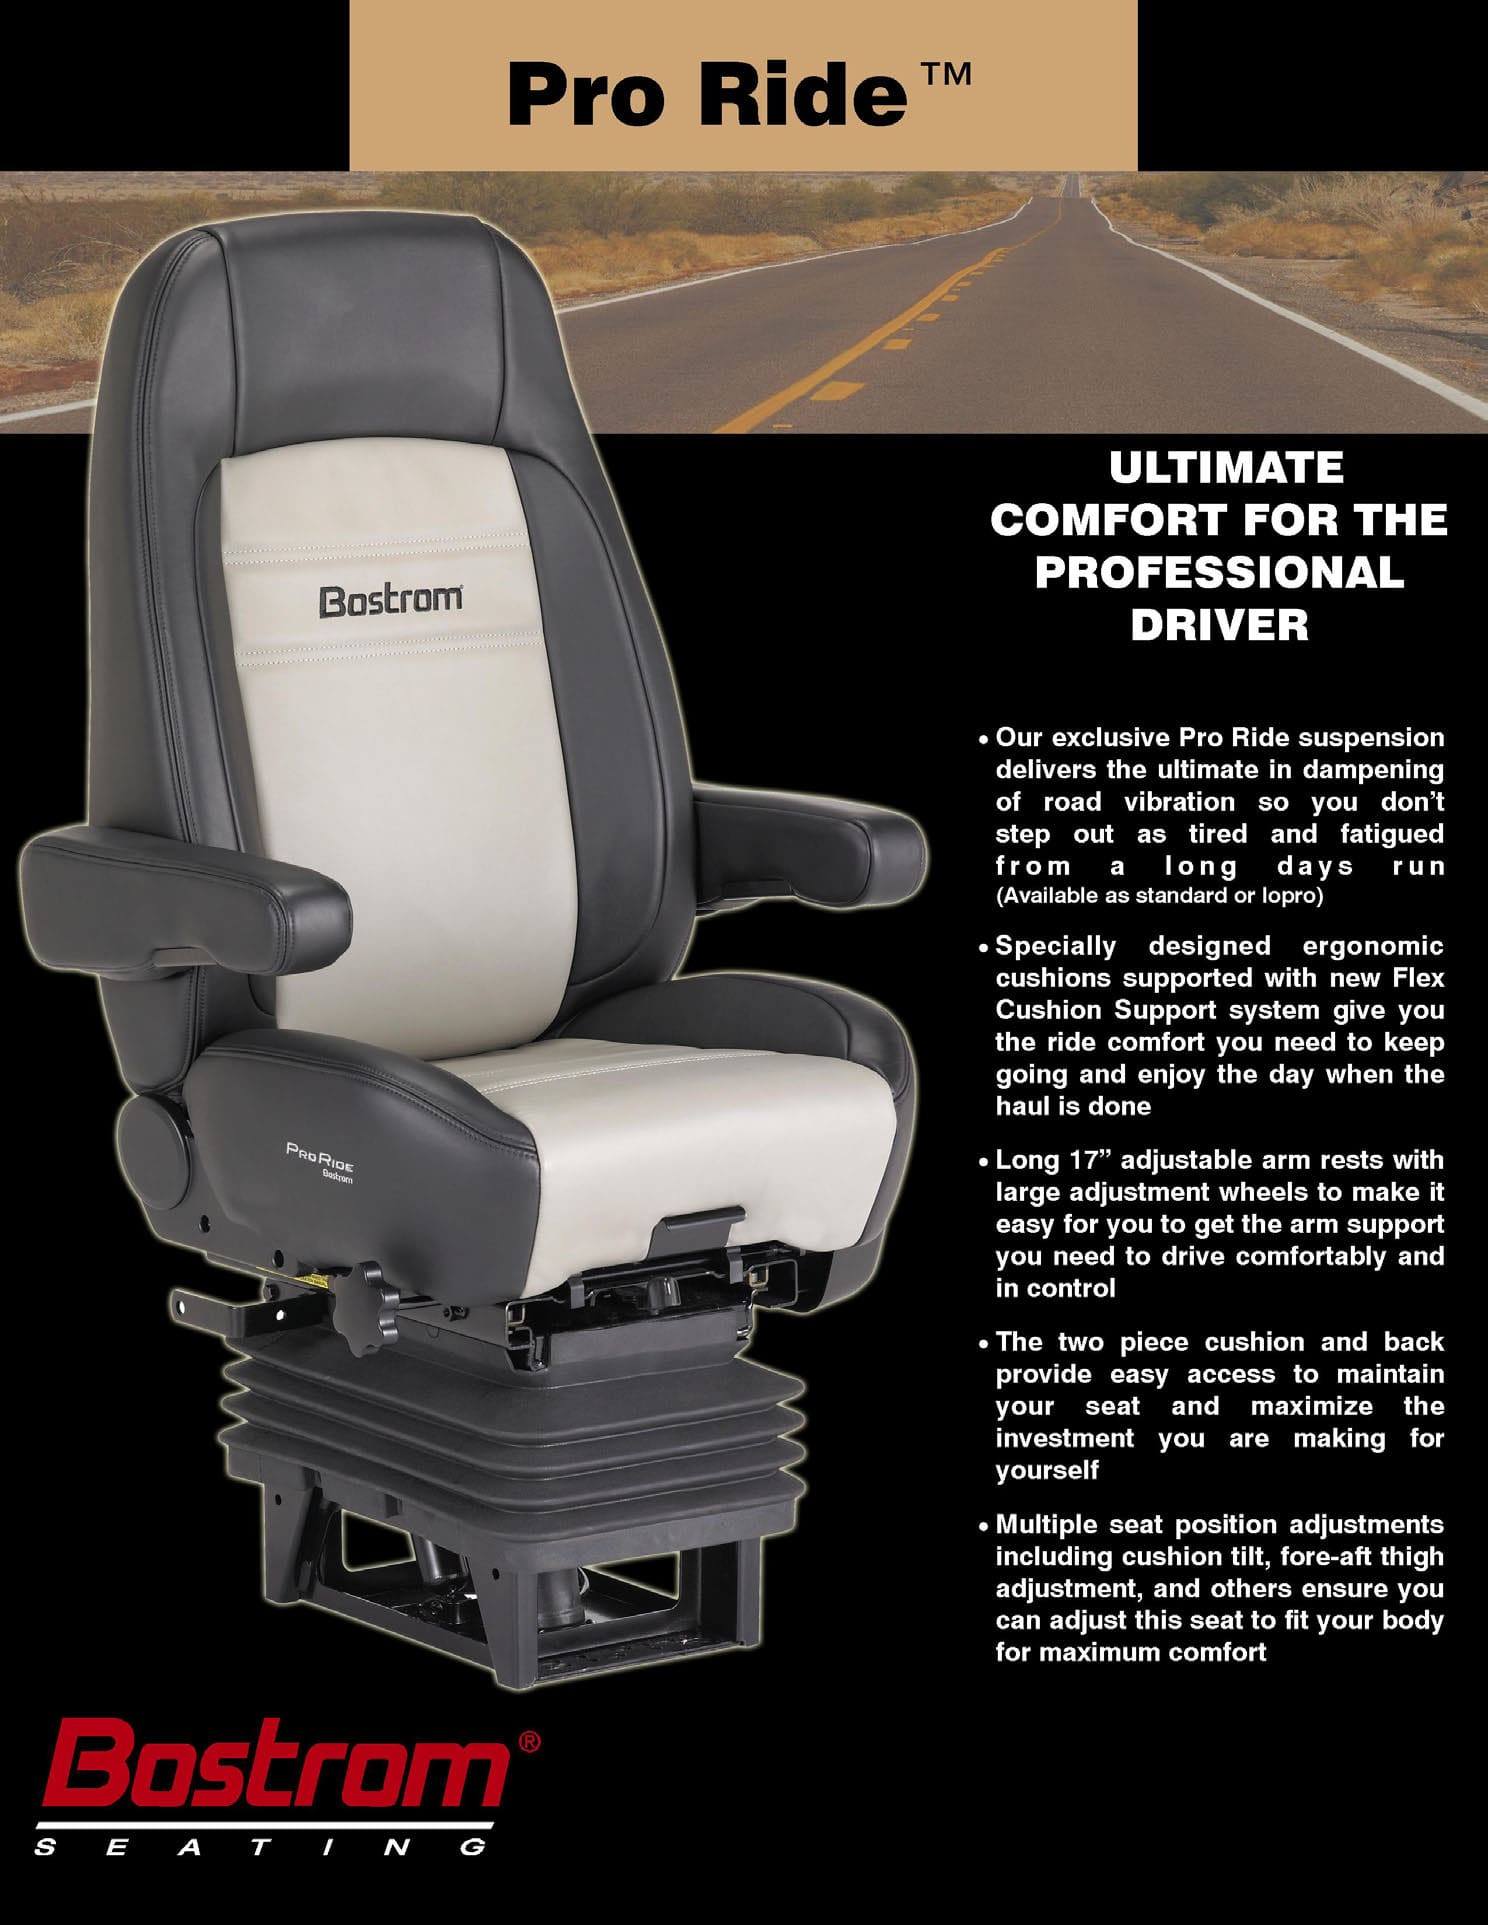 Commercial Vehicle Group's wide Bostrom truck seat